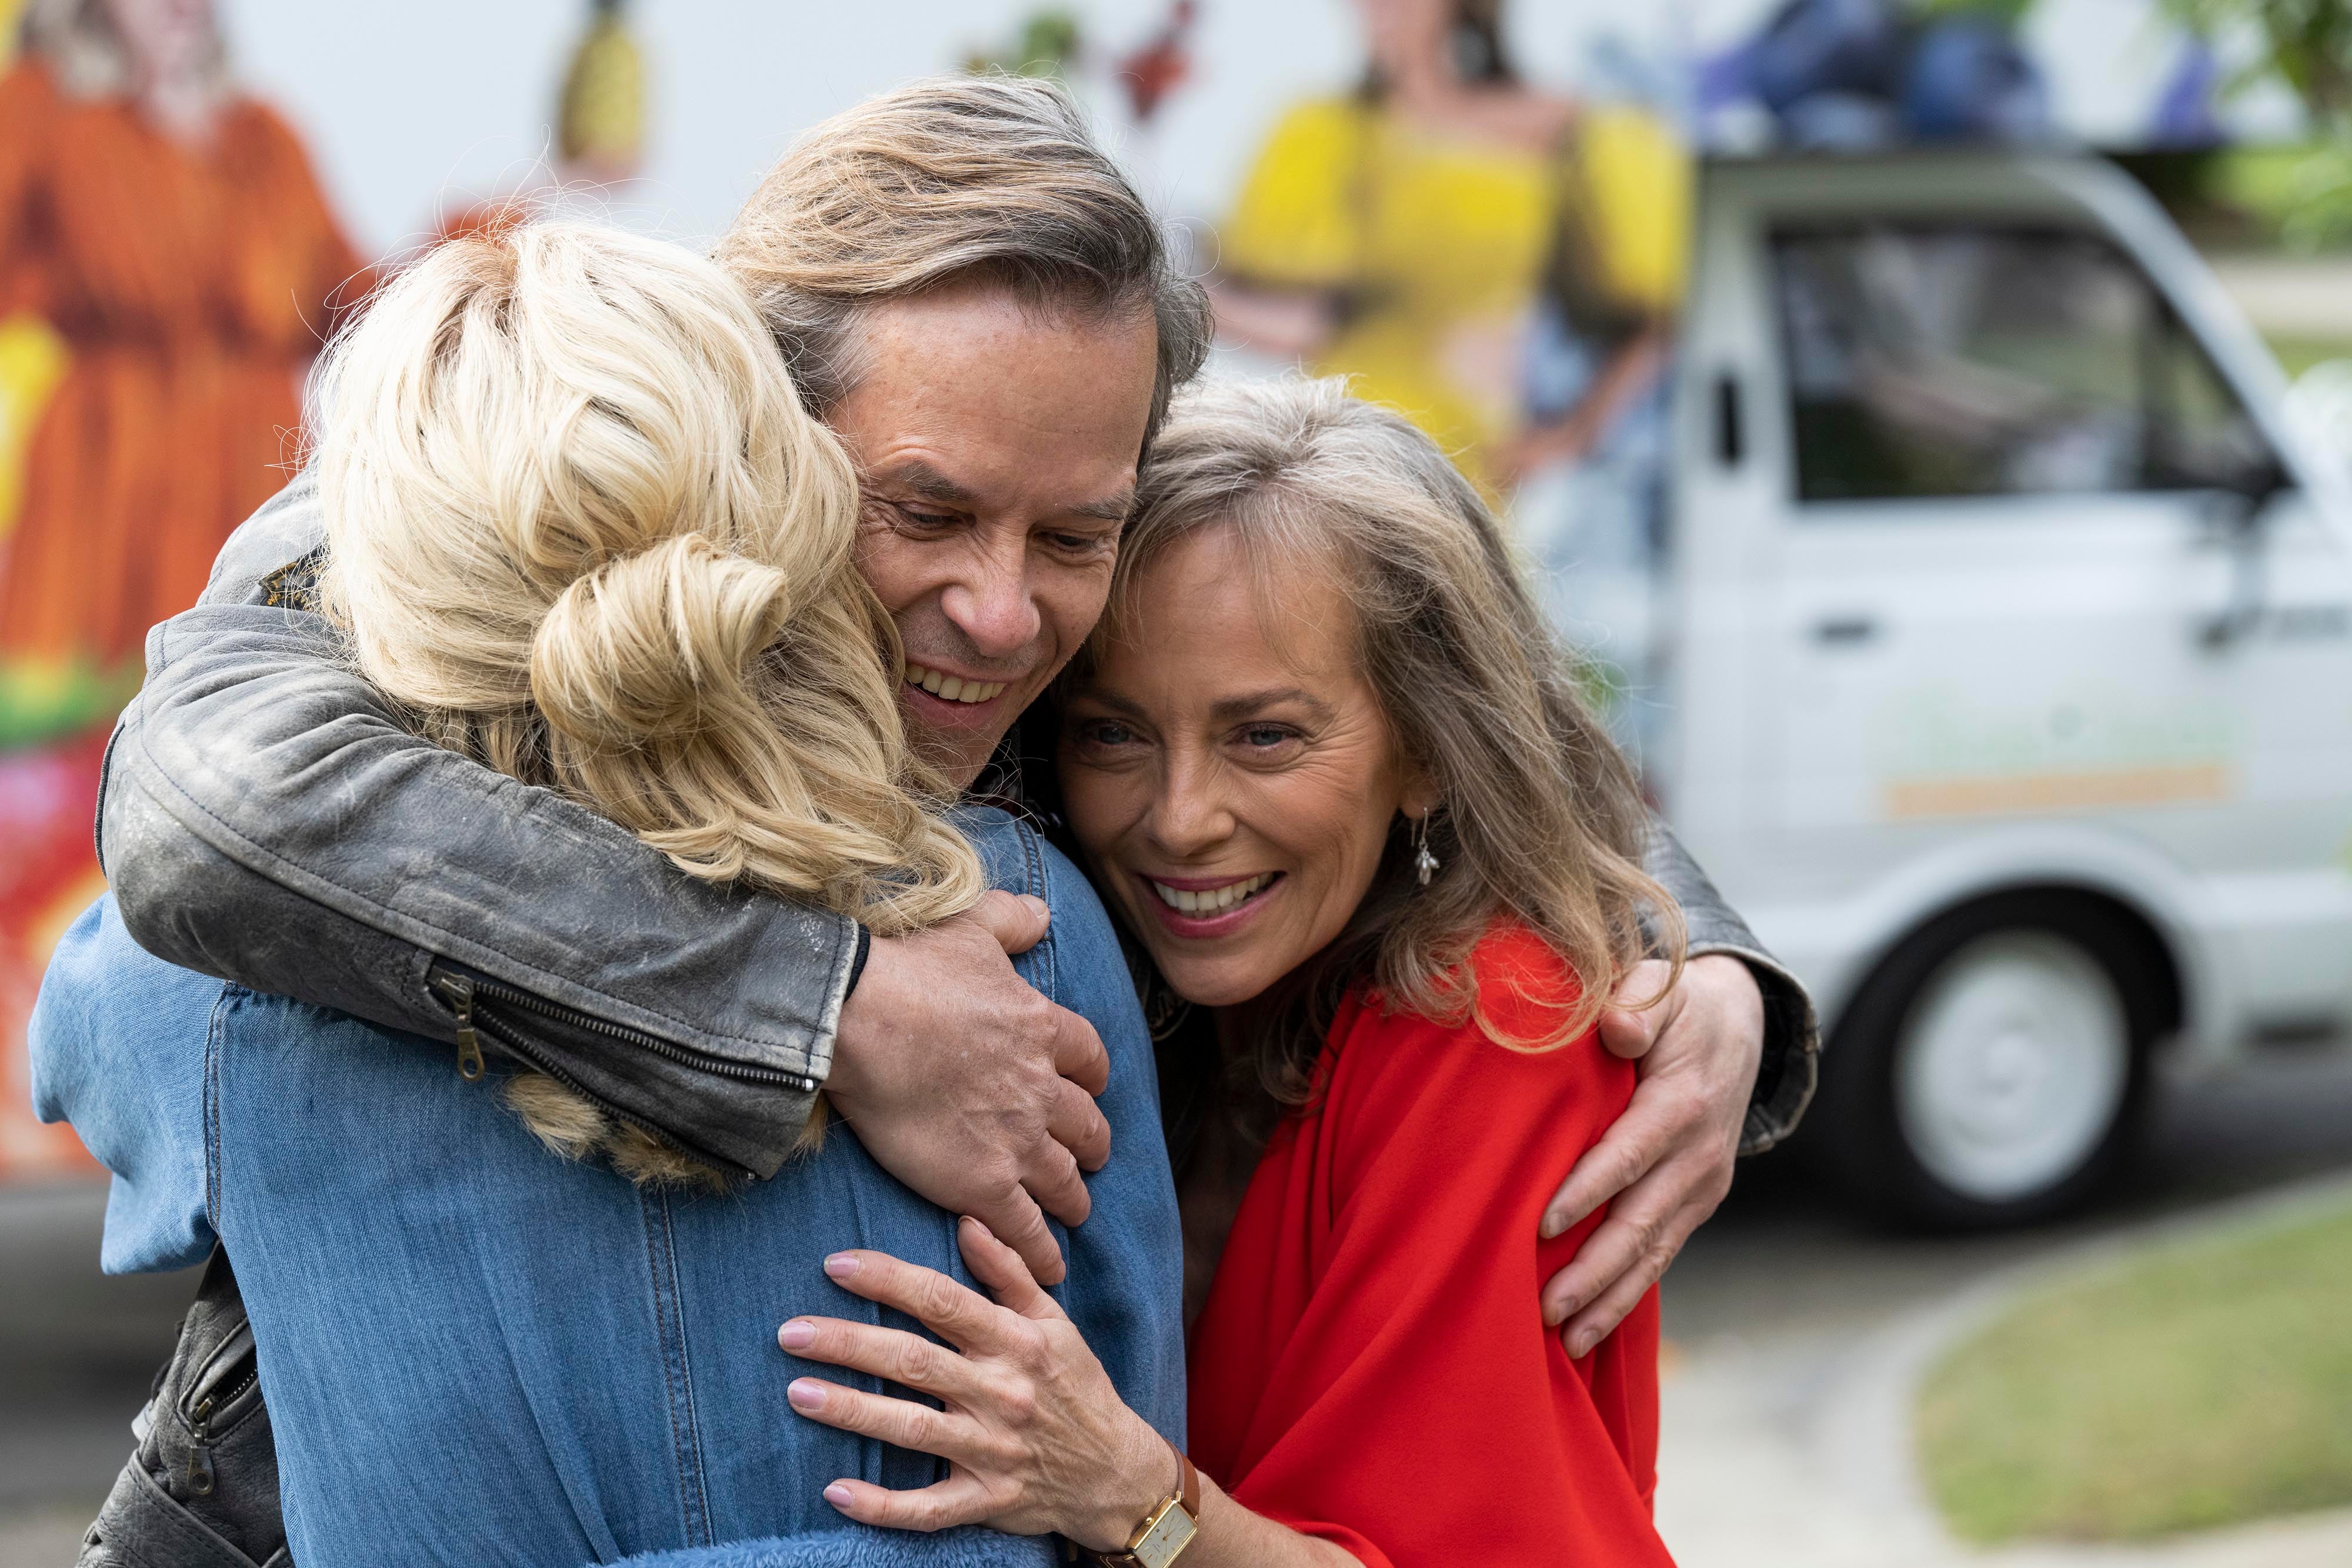 Neighbours 8903 18 Mike Young reunites with old friends on Ramsay Street 17